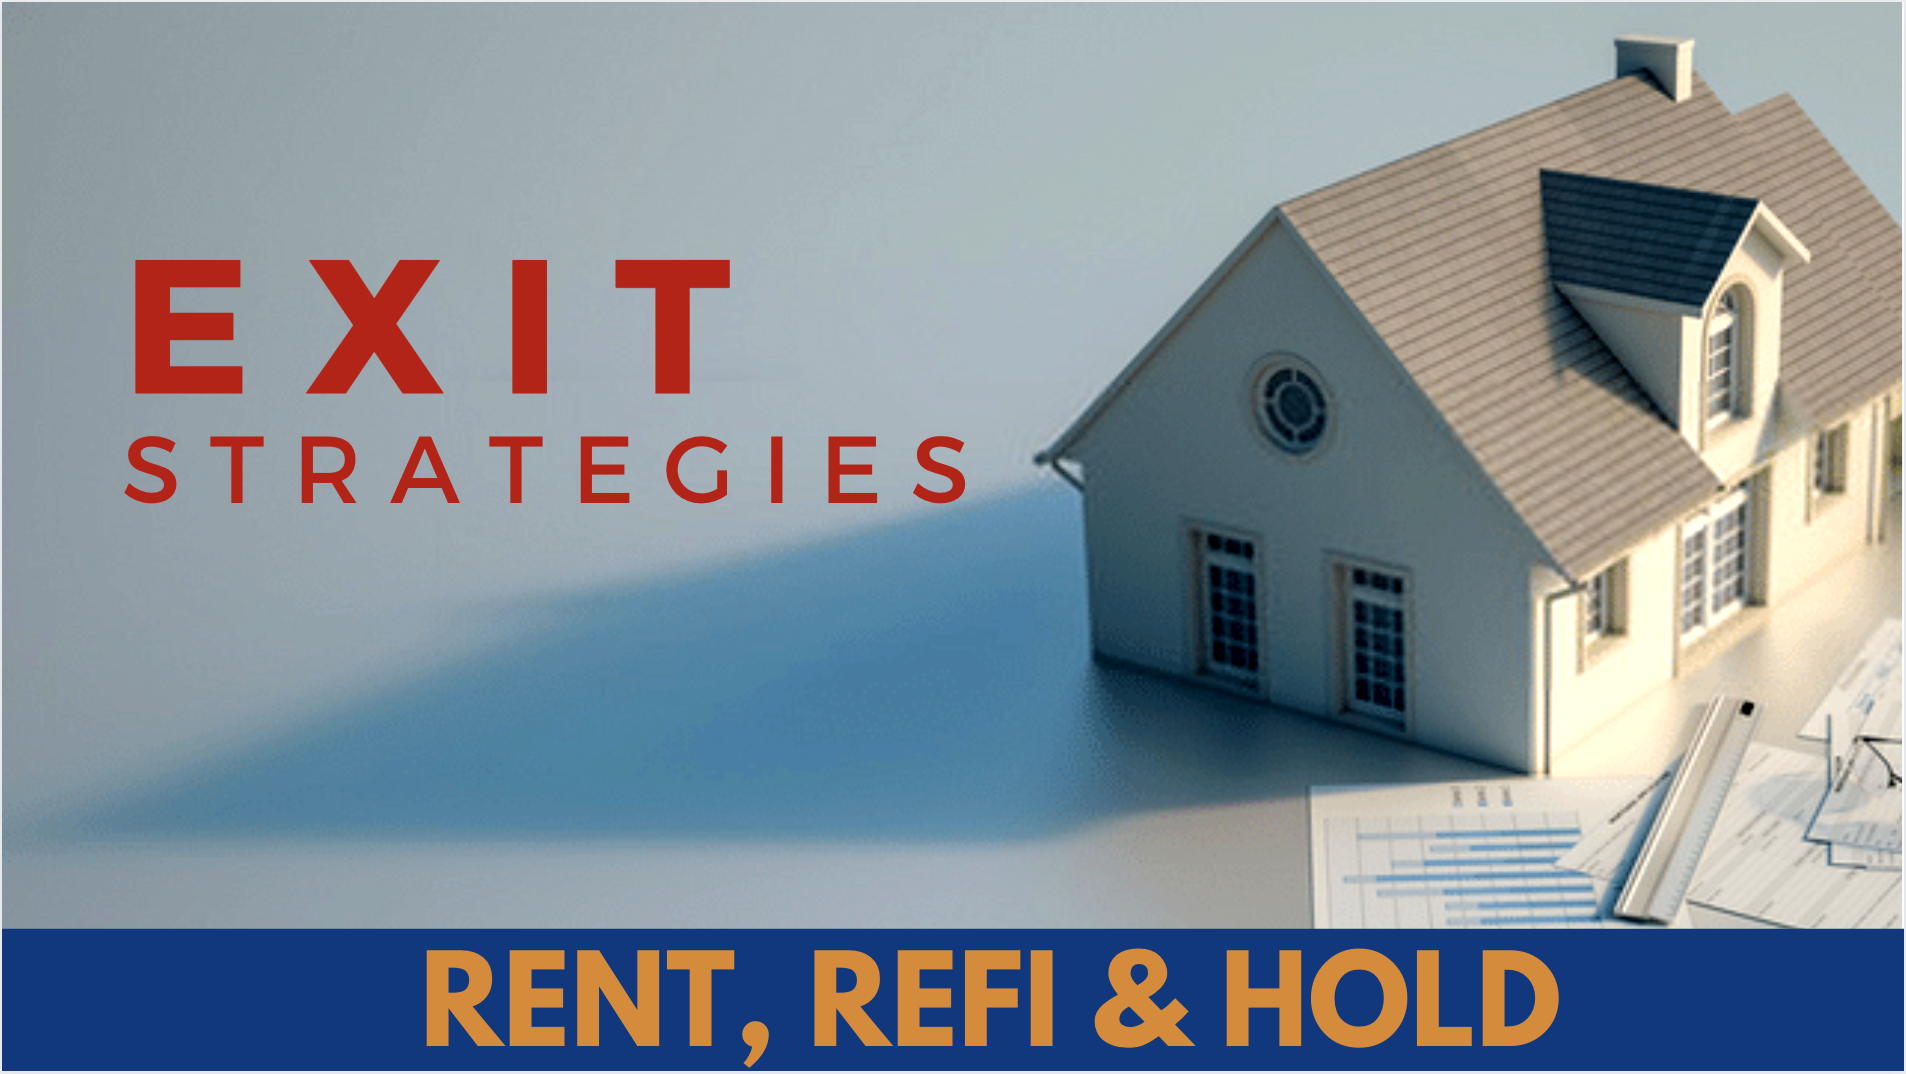 exit strategies - rent, refi & hold banner